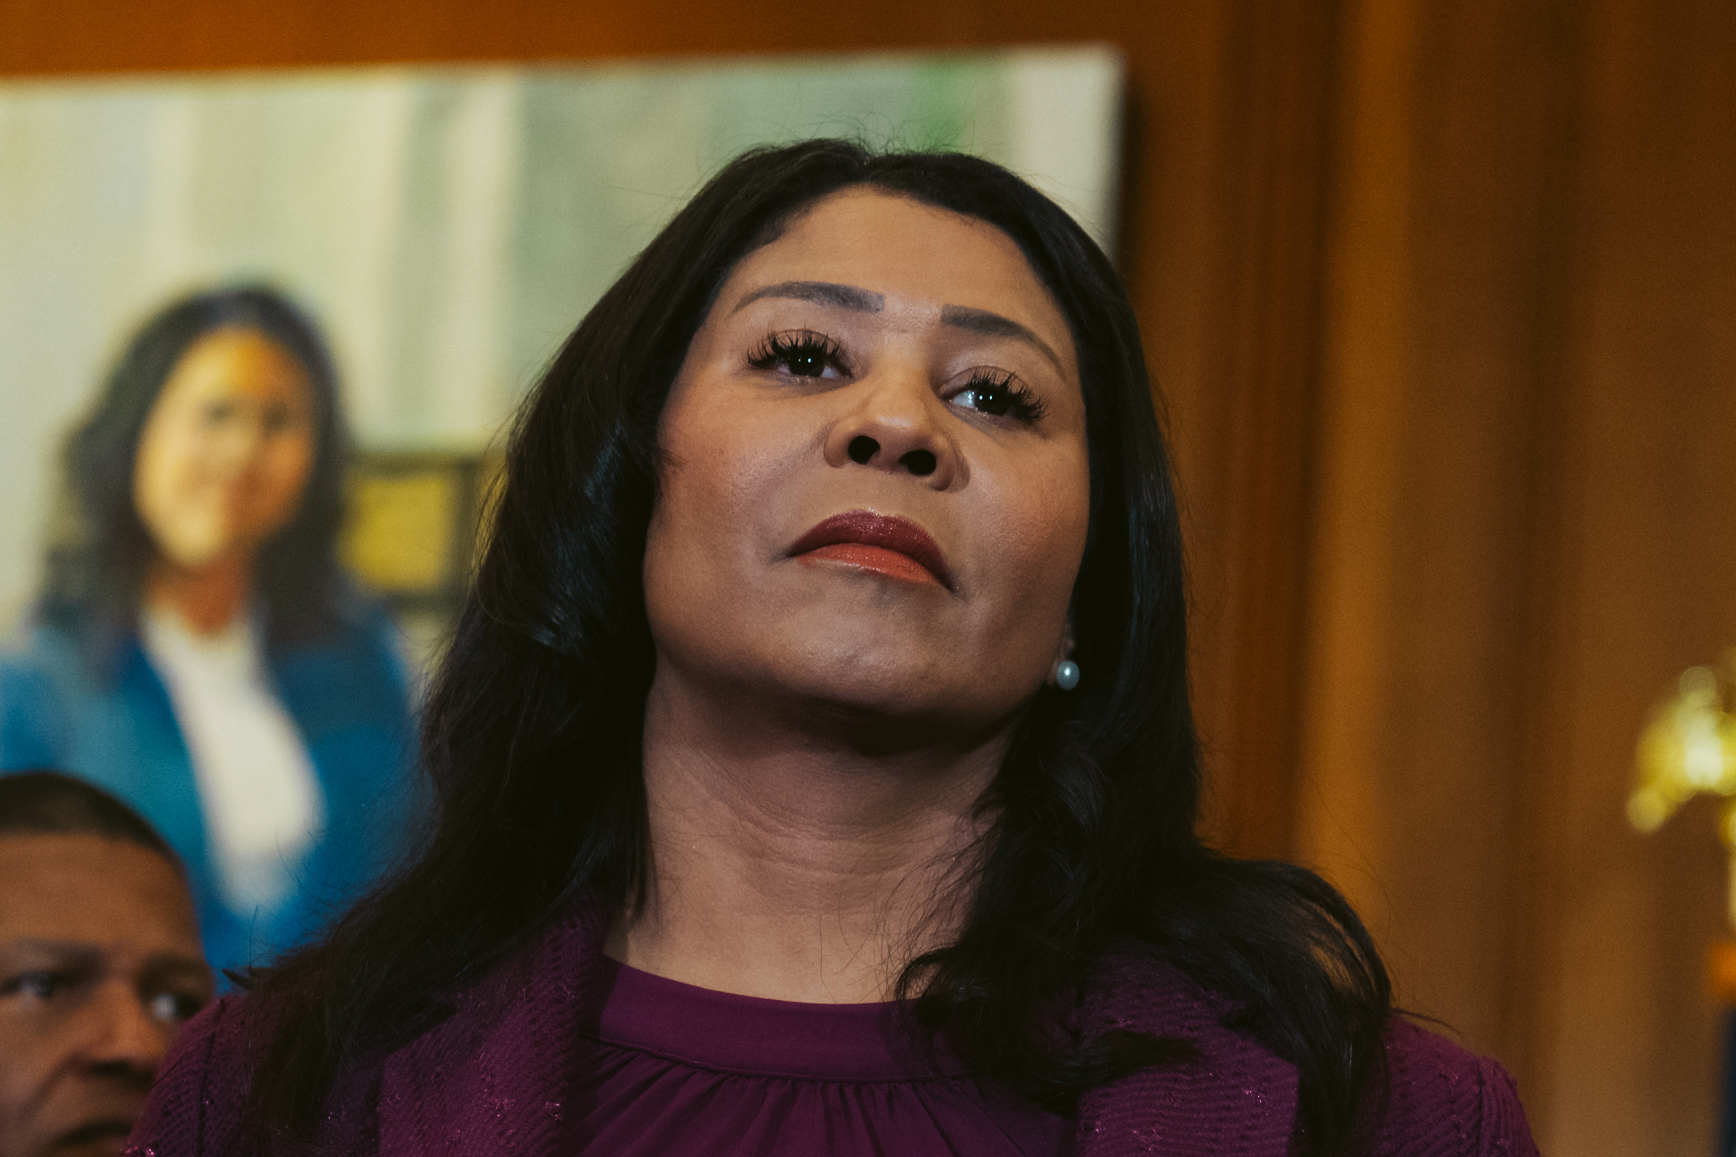 San Francisco Mayor London Breed, dressed in a purple speaks to the media during a press conference in City Hall. She stands in a wood paneled room with the American flag in the background.